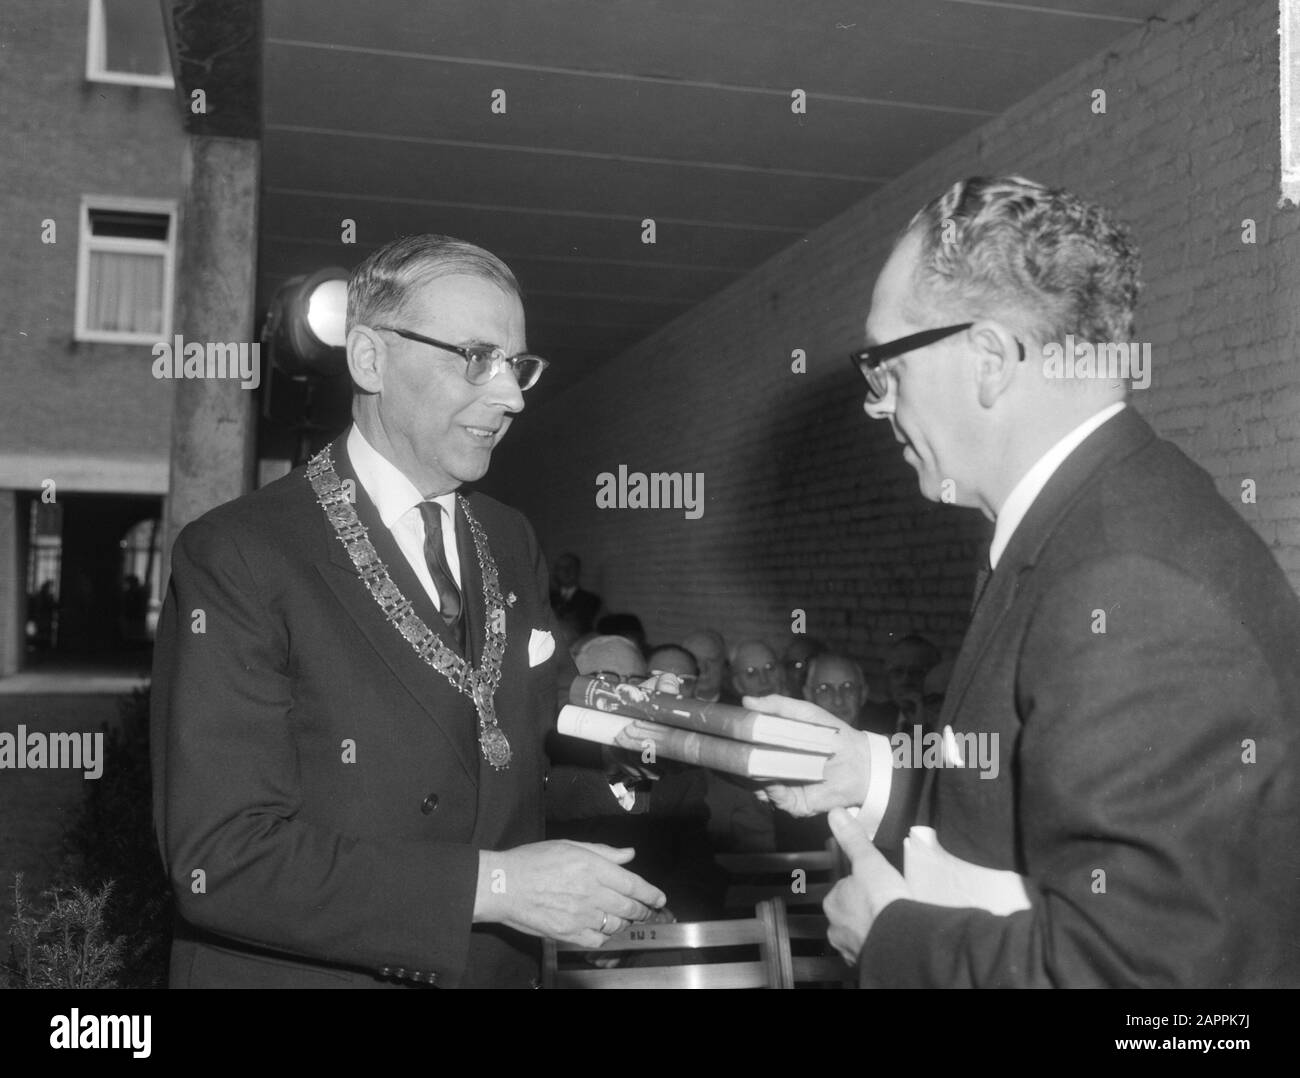 Minister Vrolijk (right) handed Mayor Van Hall the book Uné in the former theatre in Amsterdam Date: 22 april 1965 Location: Amsterdam, Noord-Holland Keywords: books , mayors, transfers, theatres Personal name: Vrolijk, Maarten Stock Photo